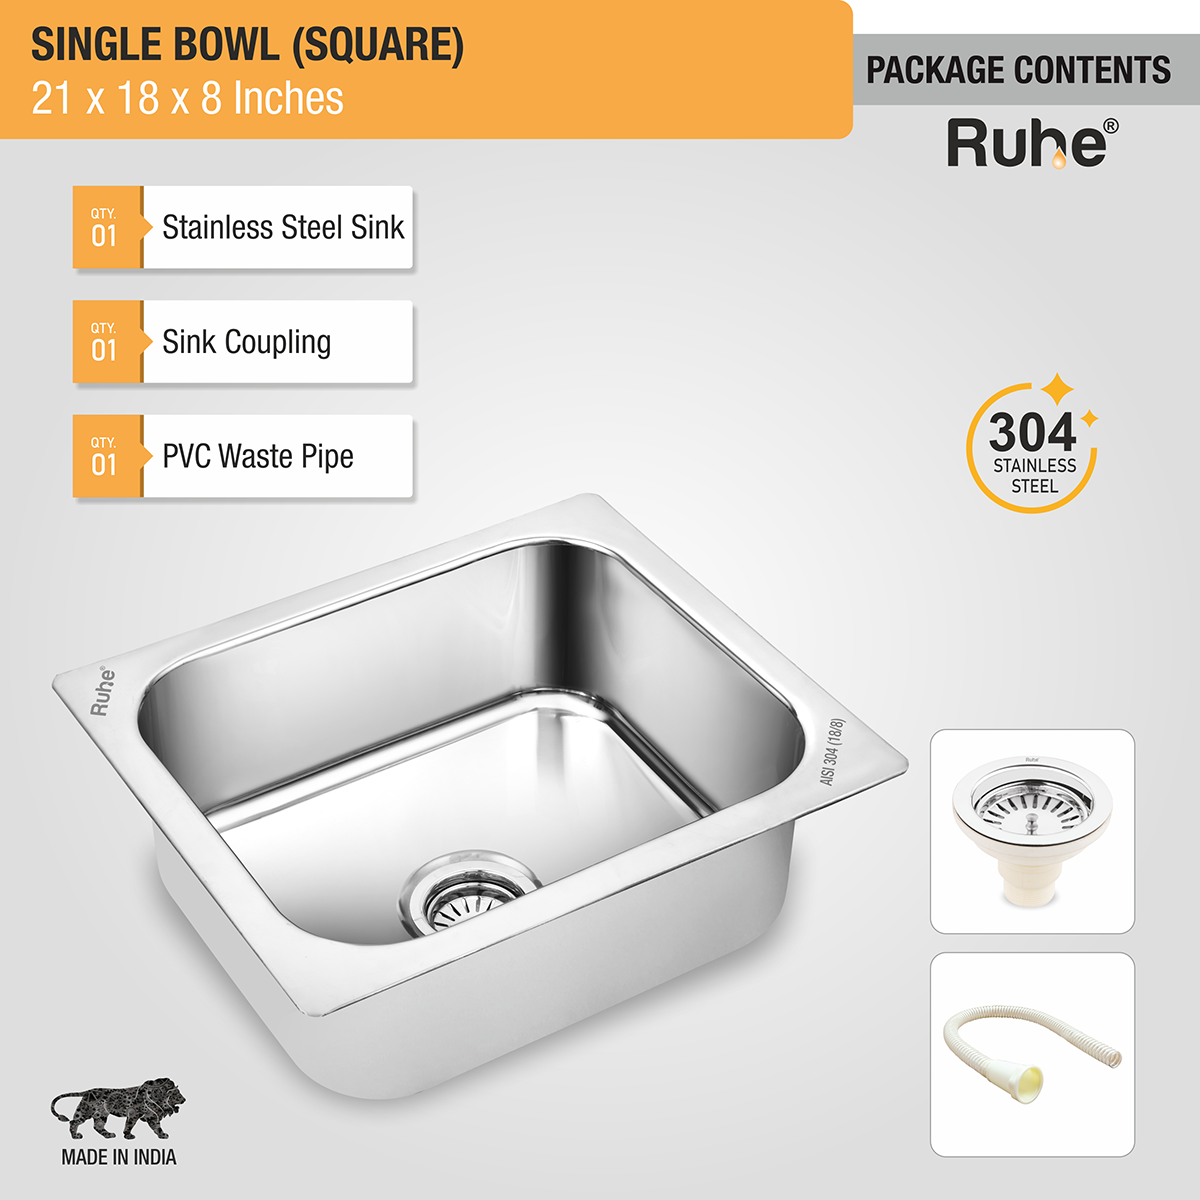 Square Single Bowl (21 x 18 x 8 inches) 304-Grade Kitchen Sink with waste coupling, pvc waste pipe